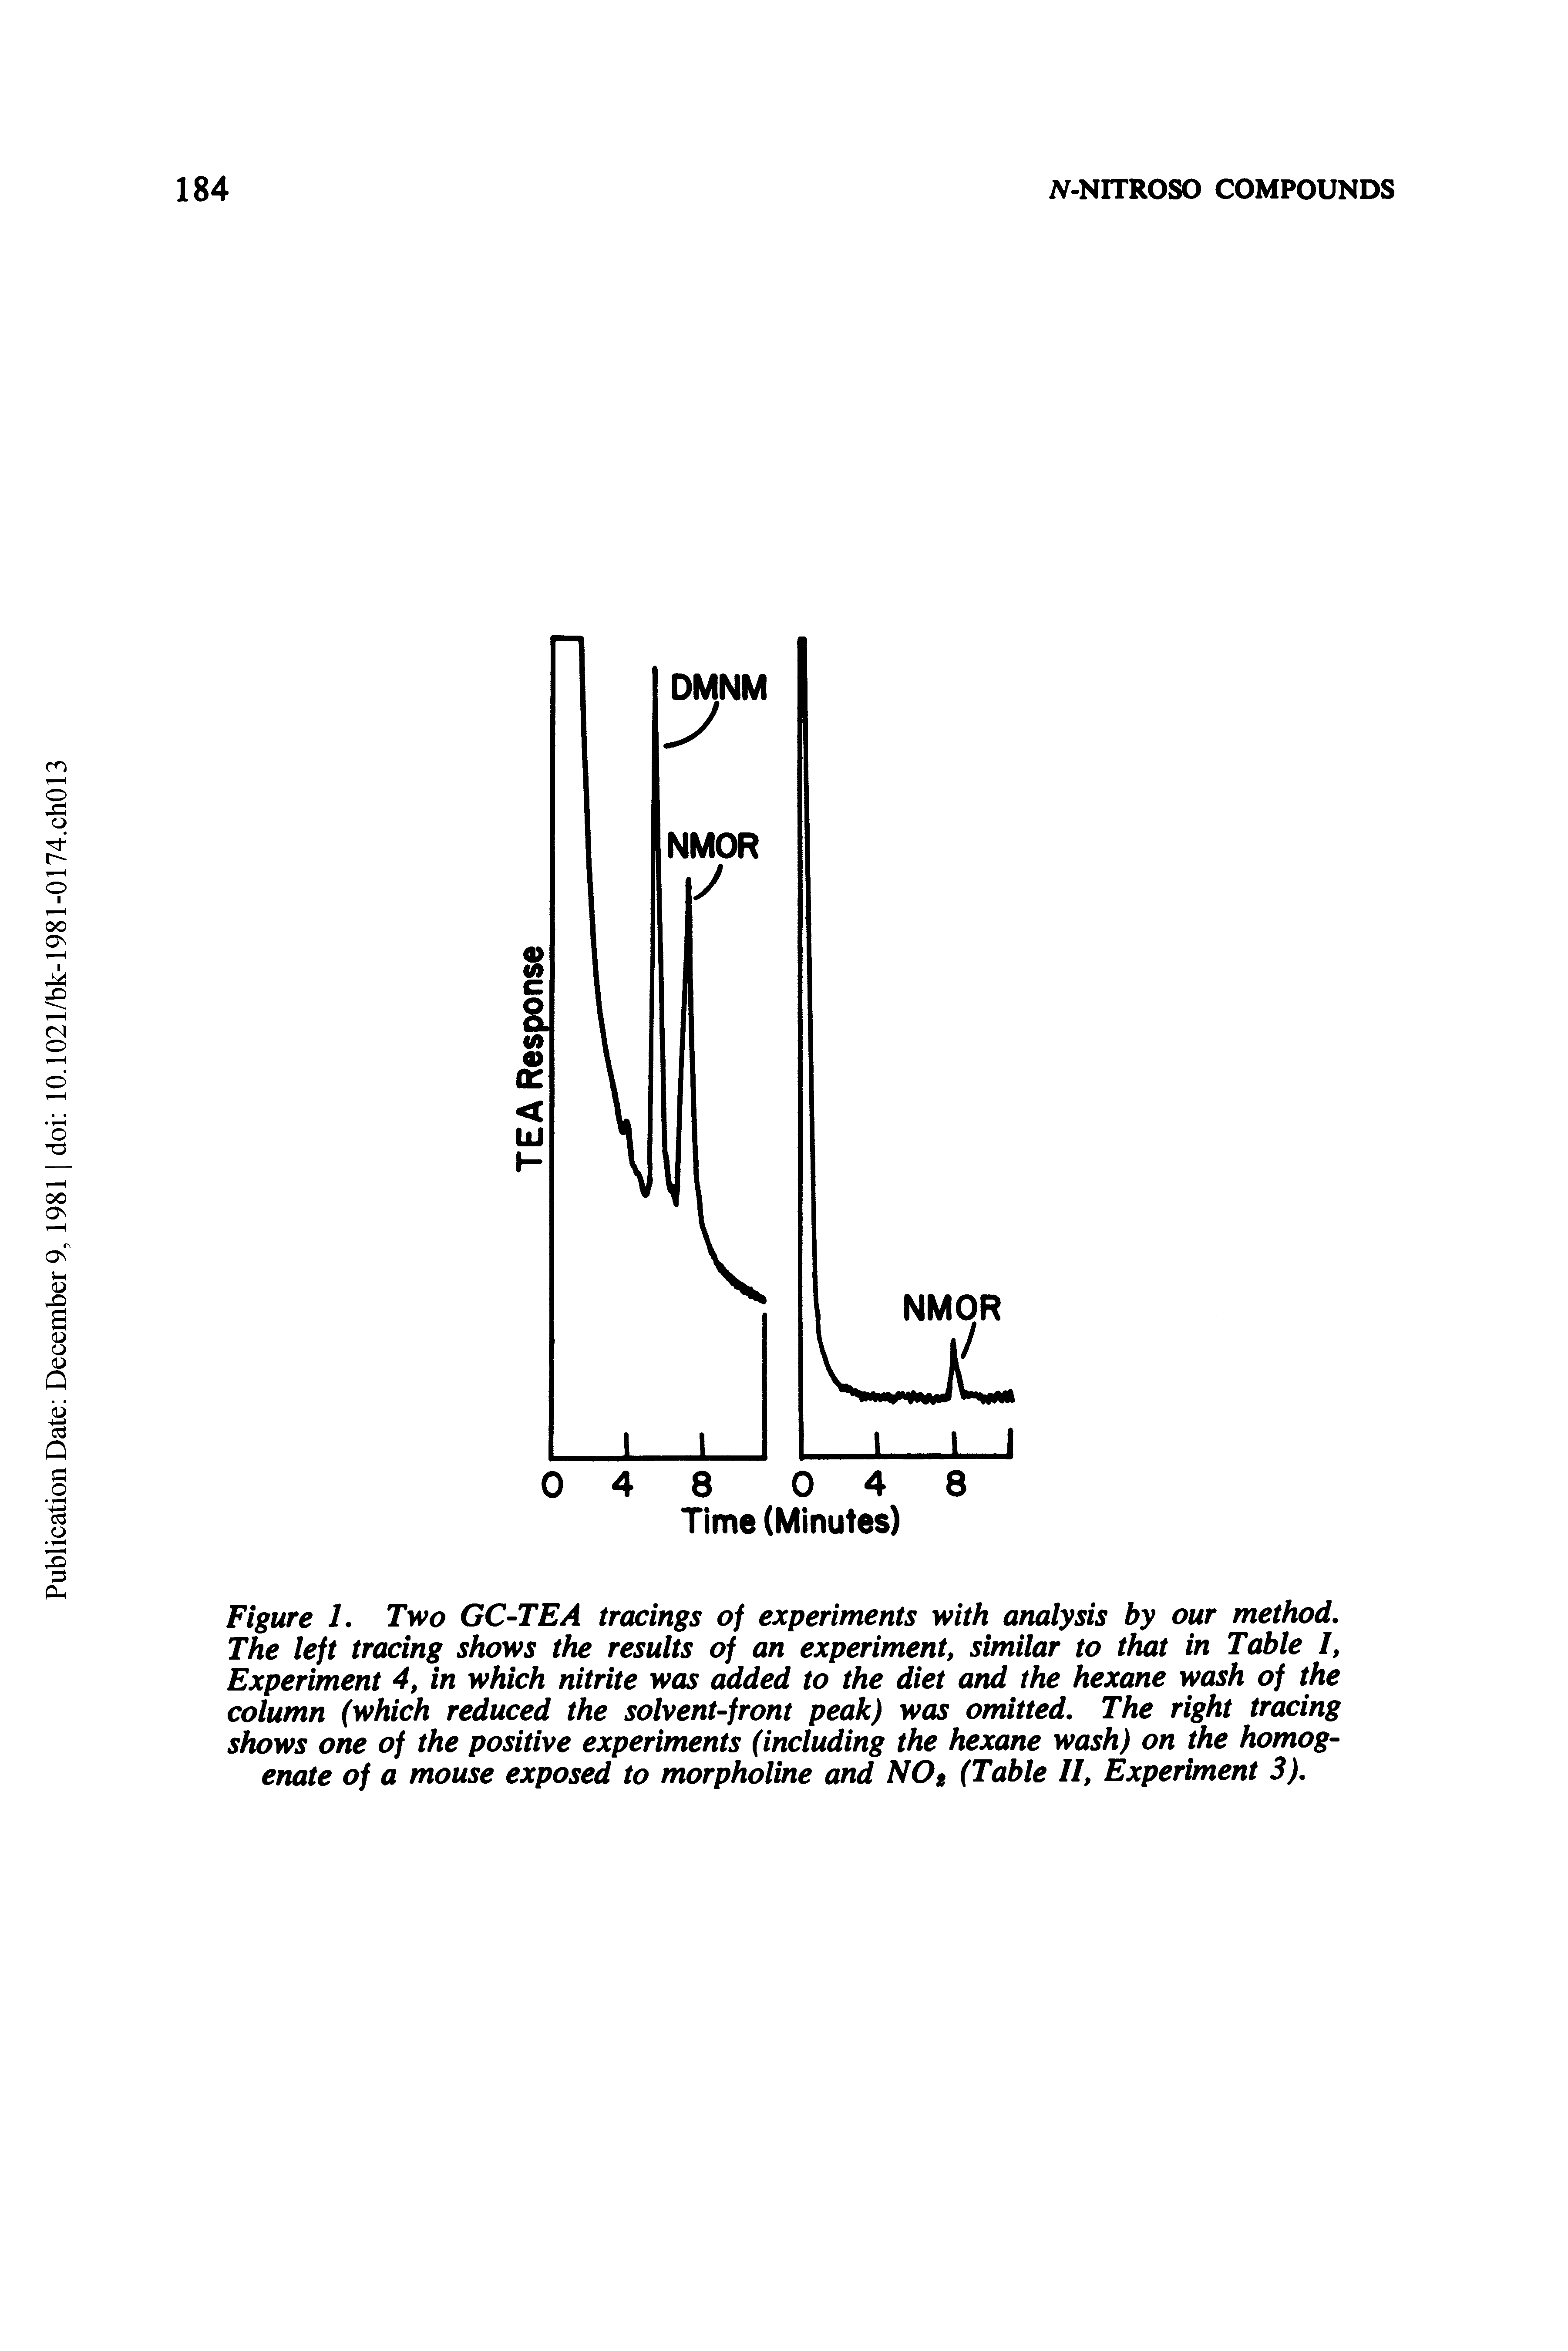 Figure 1, Two GC-TEA tracings of experiments with analysis by our method. The left tracing shows the results of an experiment, similar to that in Table /, Experiment 4, in which nitrite was added to the diet and the hexane wash of the column (which reduced the solvent-front peak) was omitted. The right tracing shows one of the positive experiments (including the hexane wash) on the homogenate of a mouse exposed to morpholine and NOt (Table II, Experiment 3),...